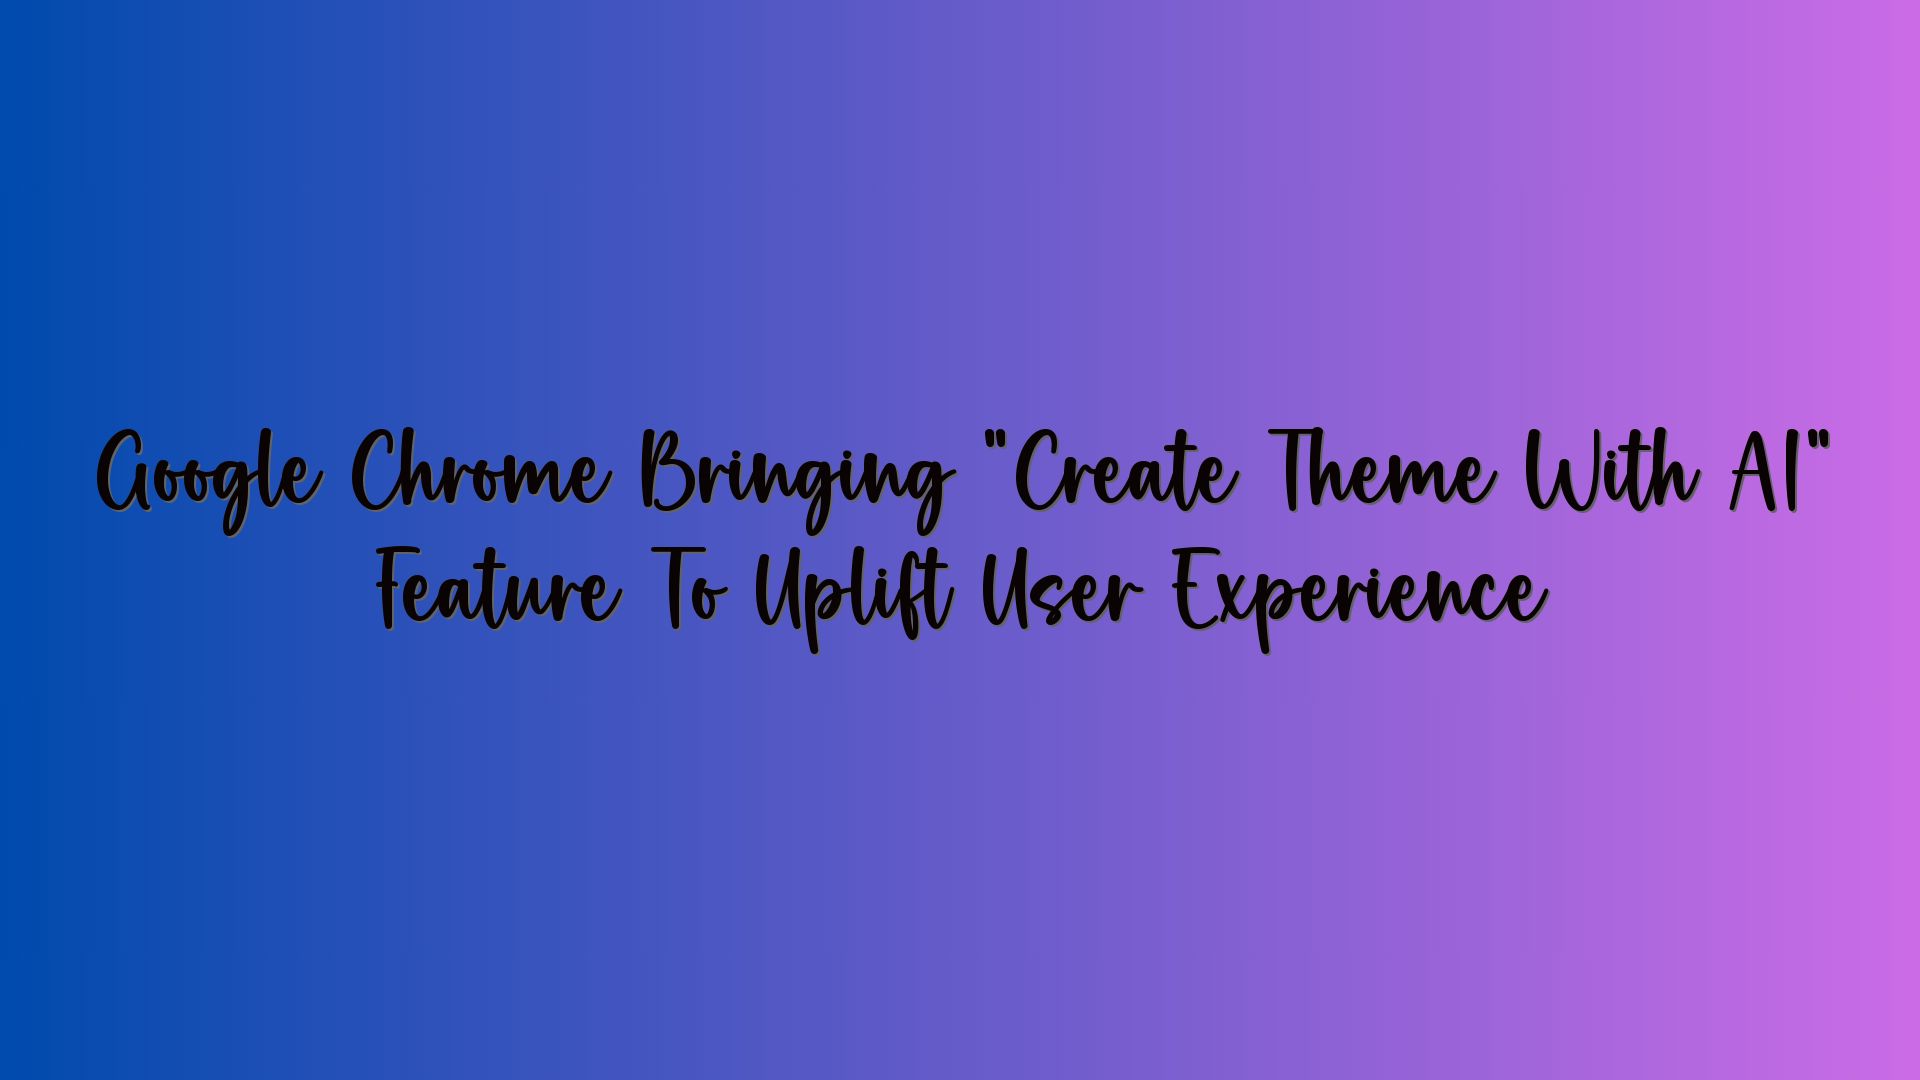 Google Chrome Bringing “Create Theme With AI” Feature To Uplift User Experience